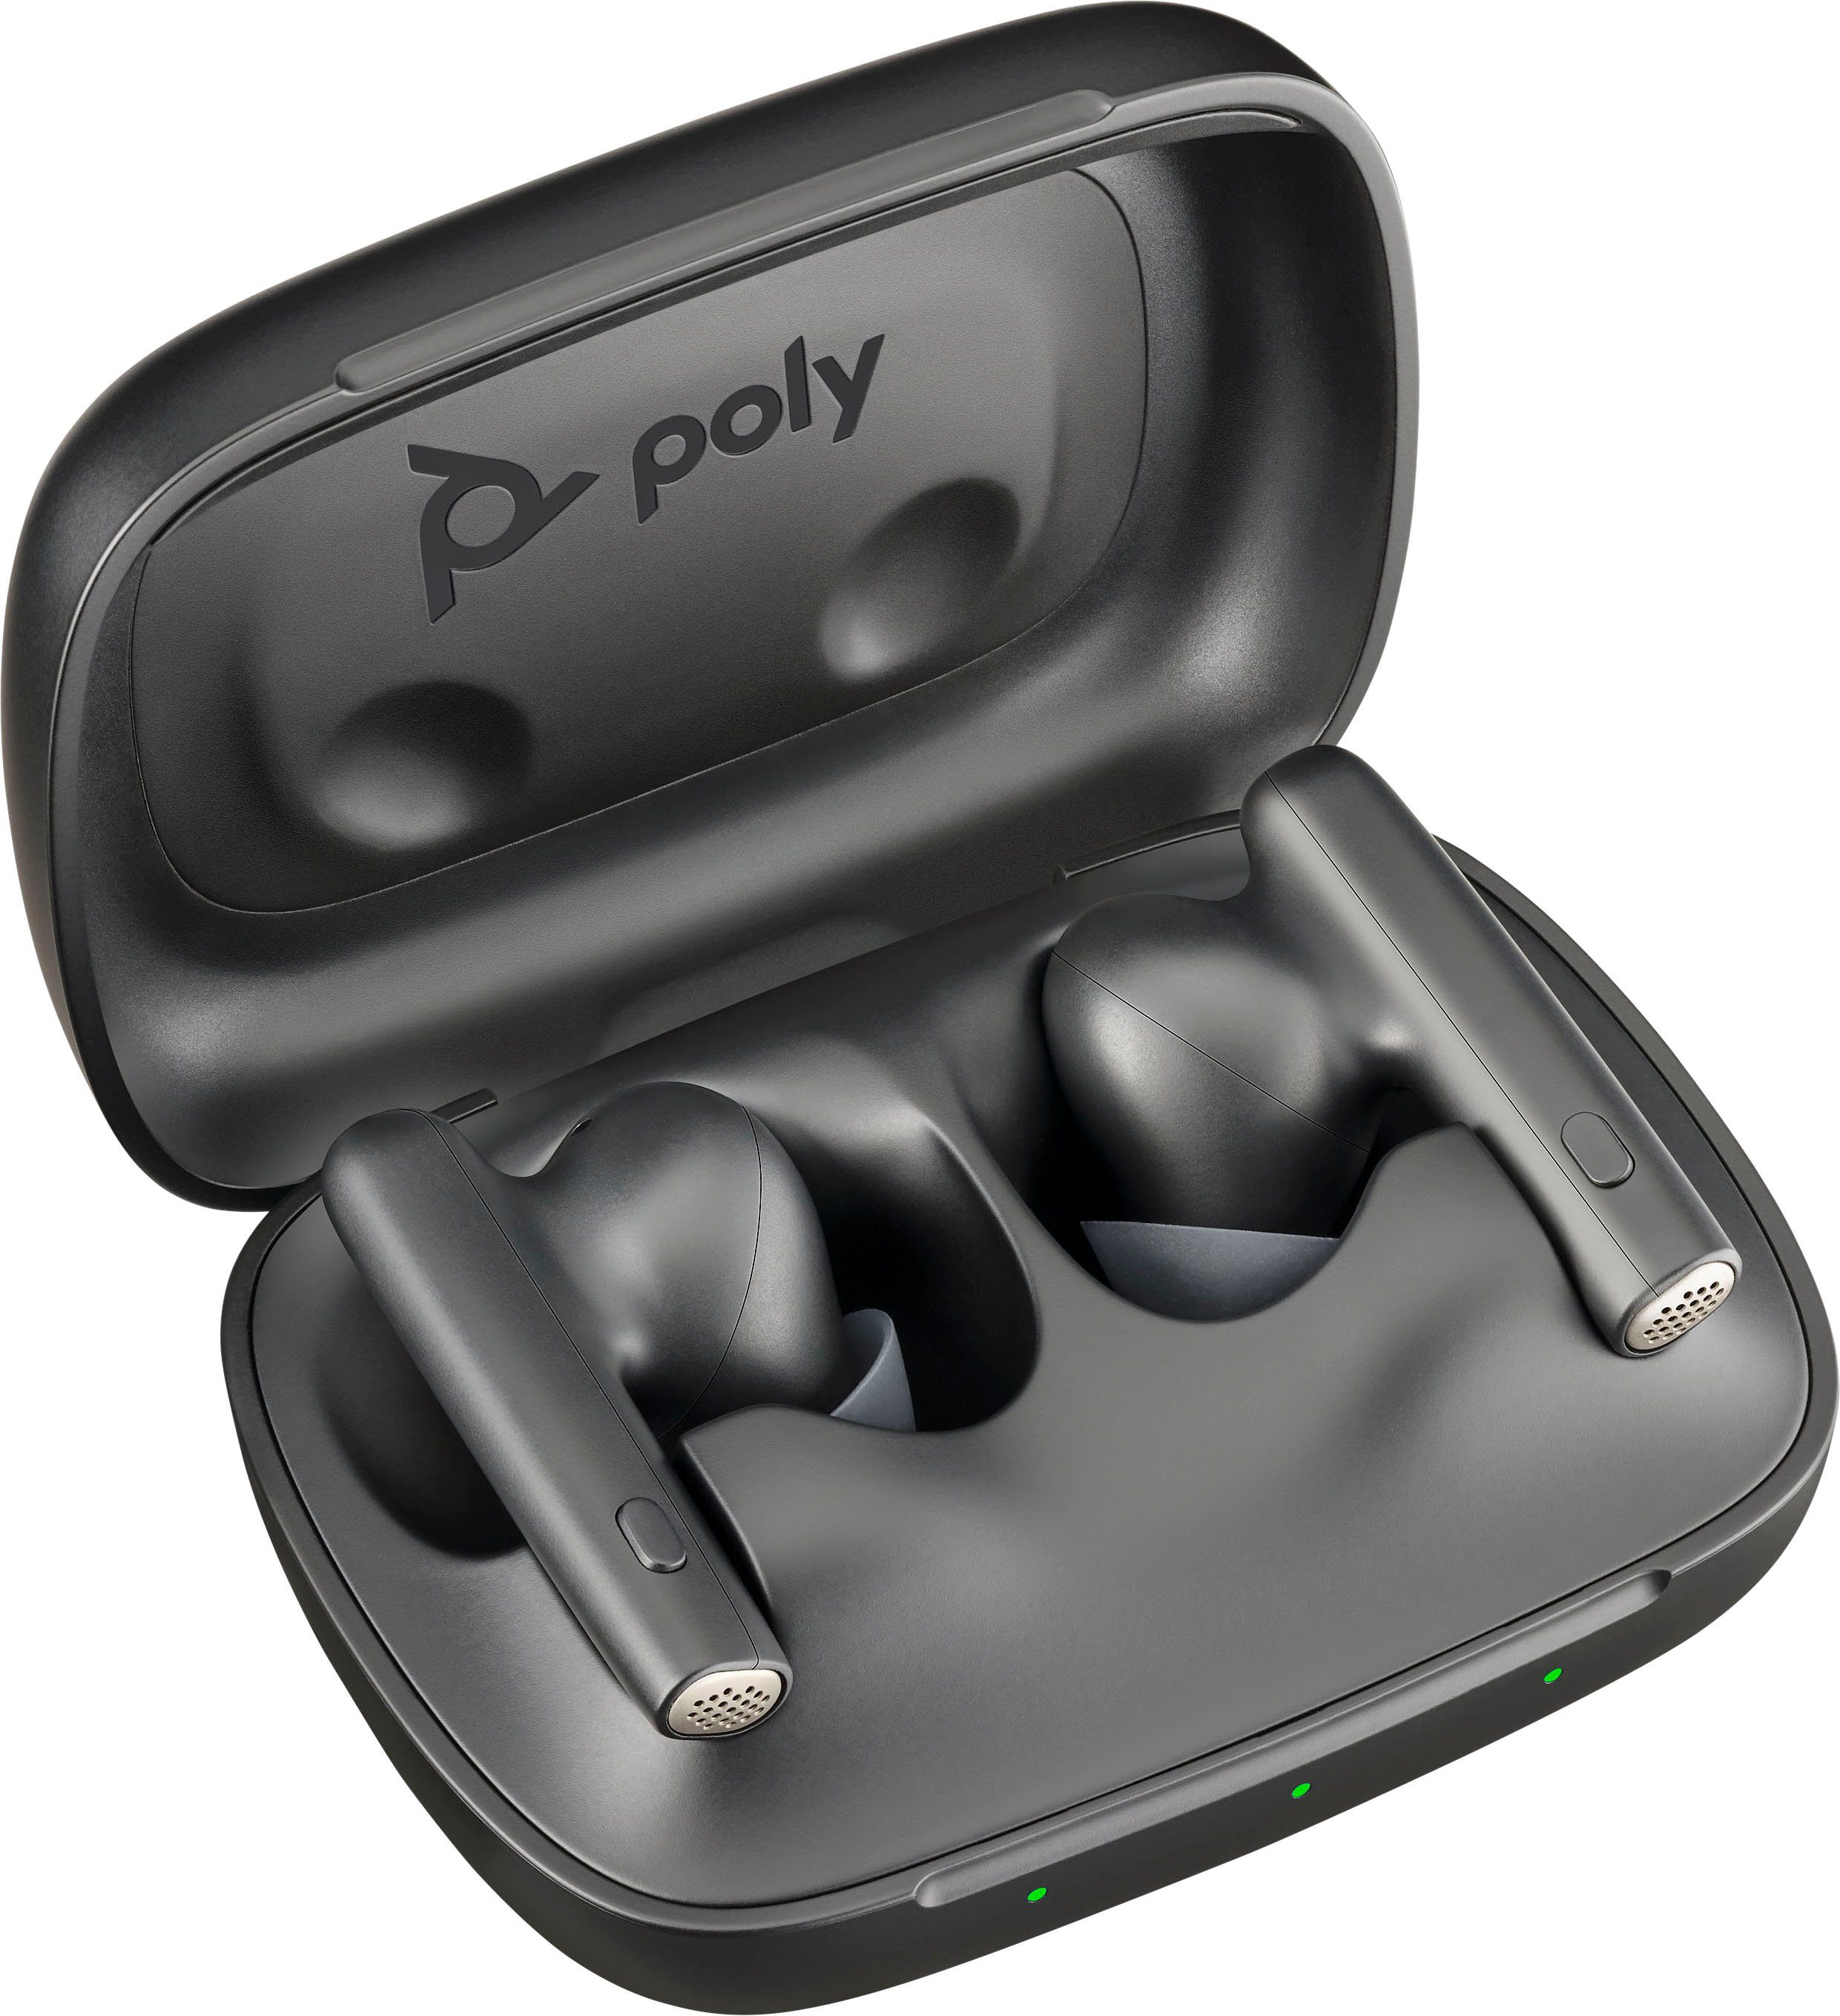 Poly Voyager Free 60 wireless In-Ear-Kopfhörer (Active Noise Cancelling (ANC), USB-C/A)